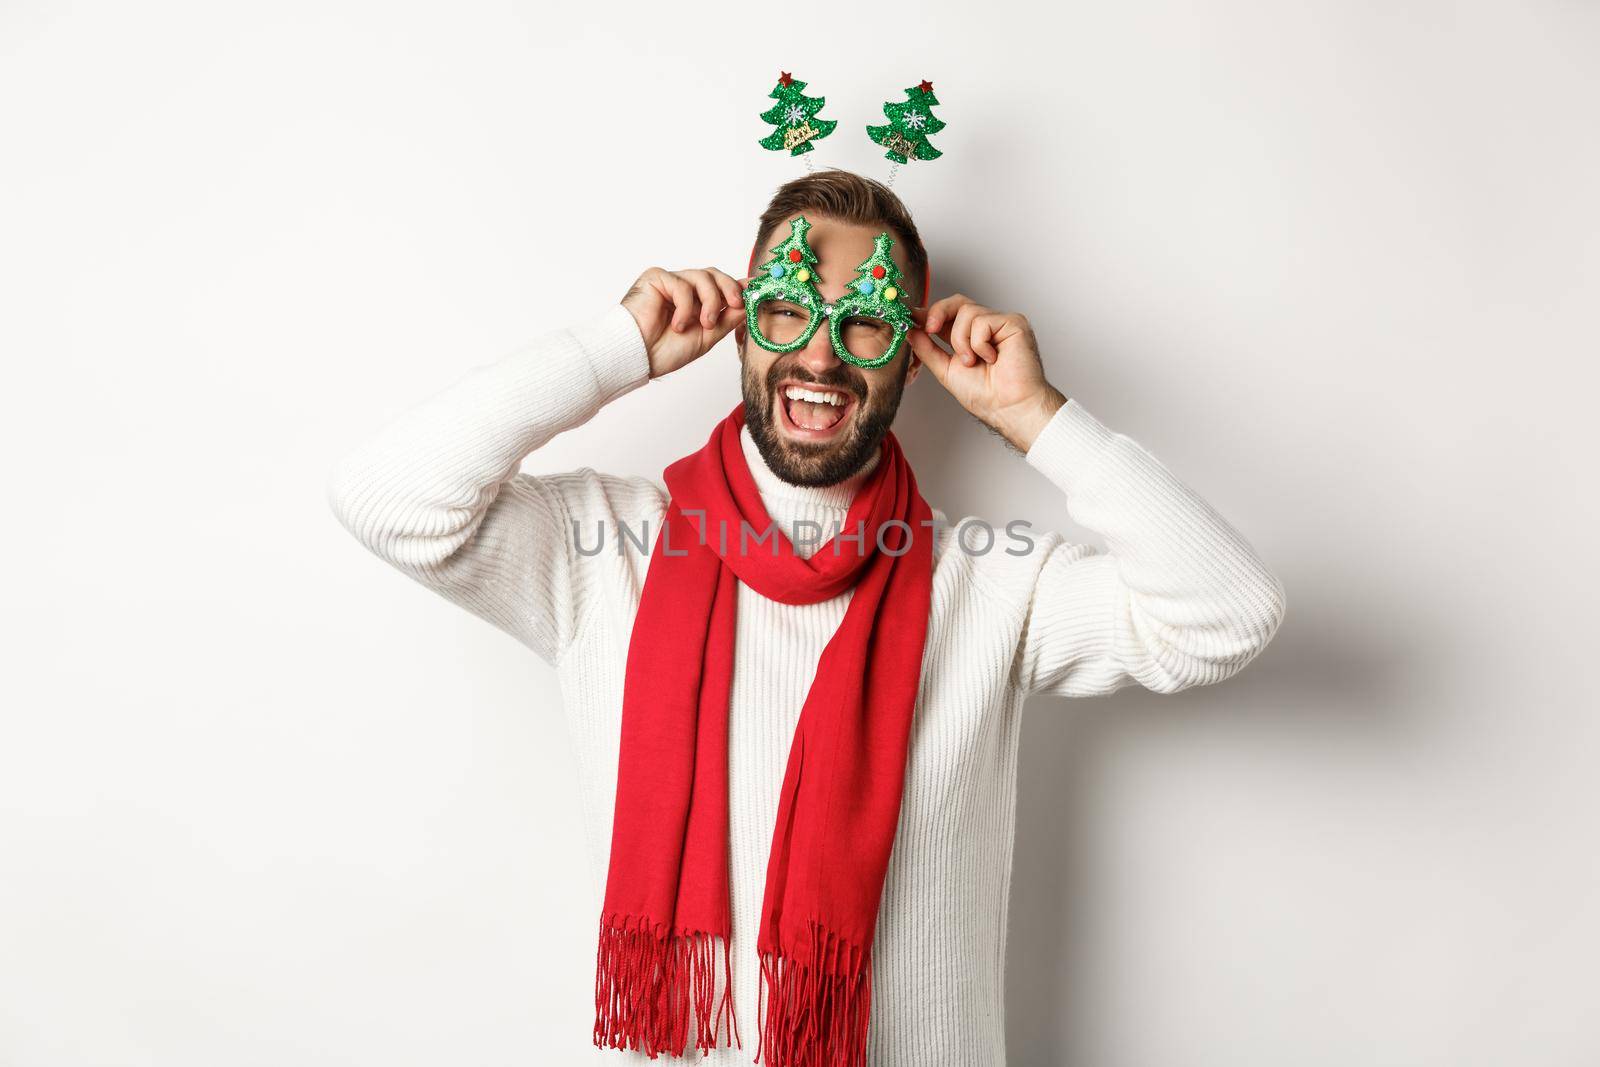 Christmas, New Year and celebration concept. Handsome guy celebrating, put on party glasses and accessory, laughing happy, standing over white background.